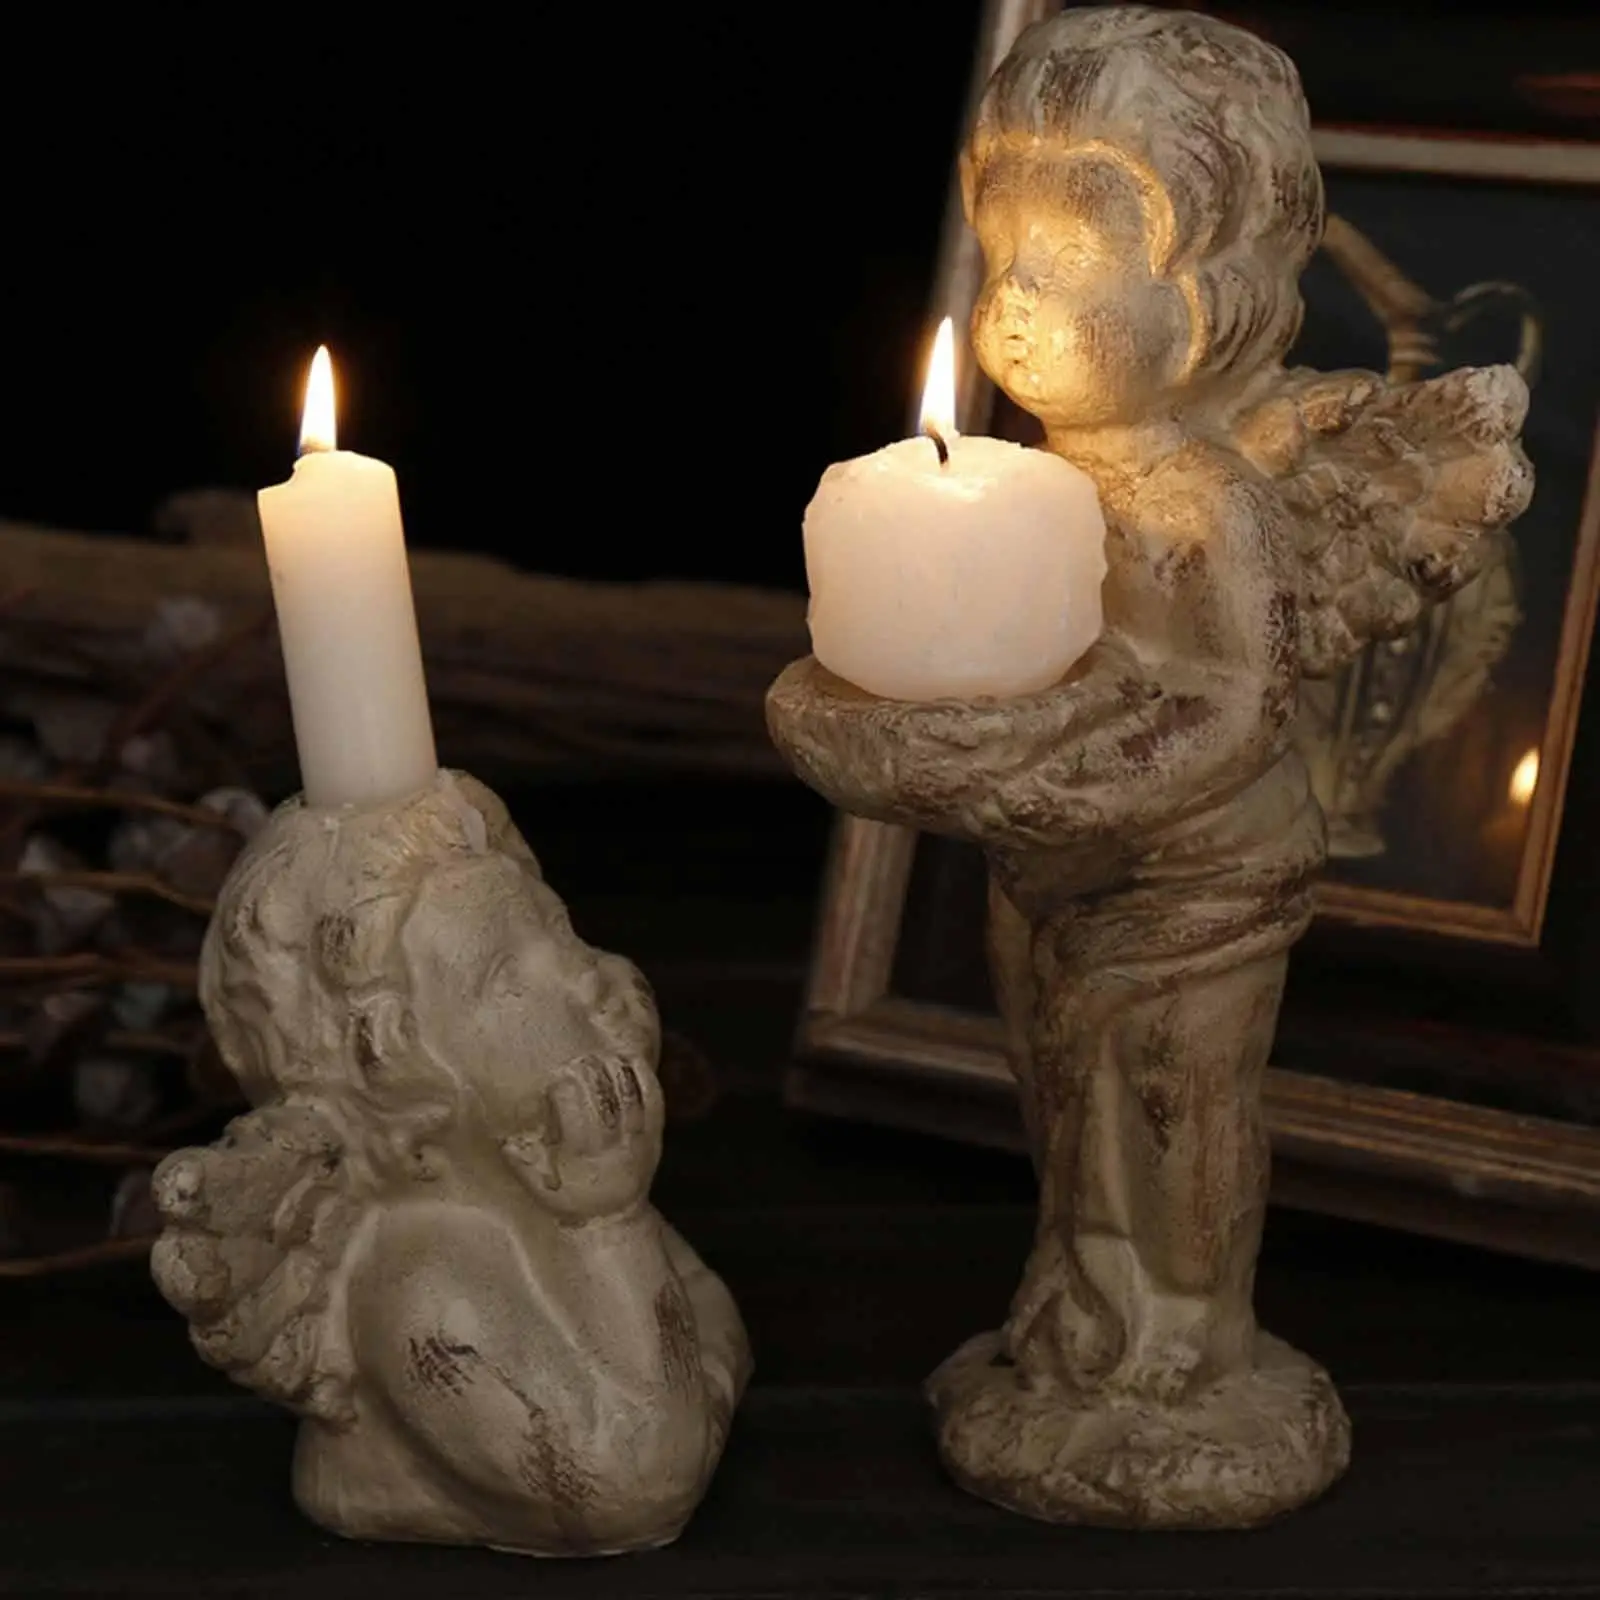 Tealight Candle Holder Decor Candlestick Statue Angel Figurines Candle Stand Table Anniversary Bridal Garden Restaurant